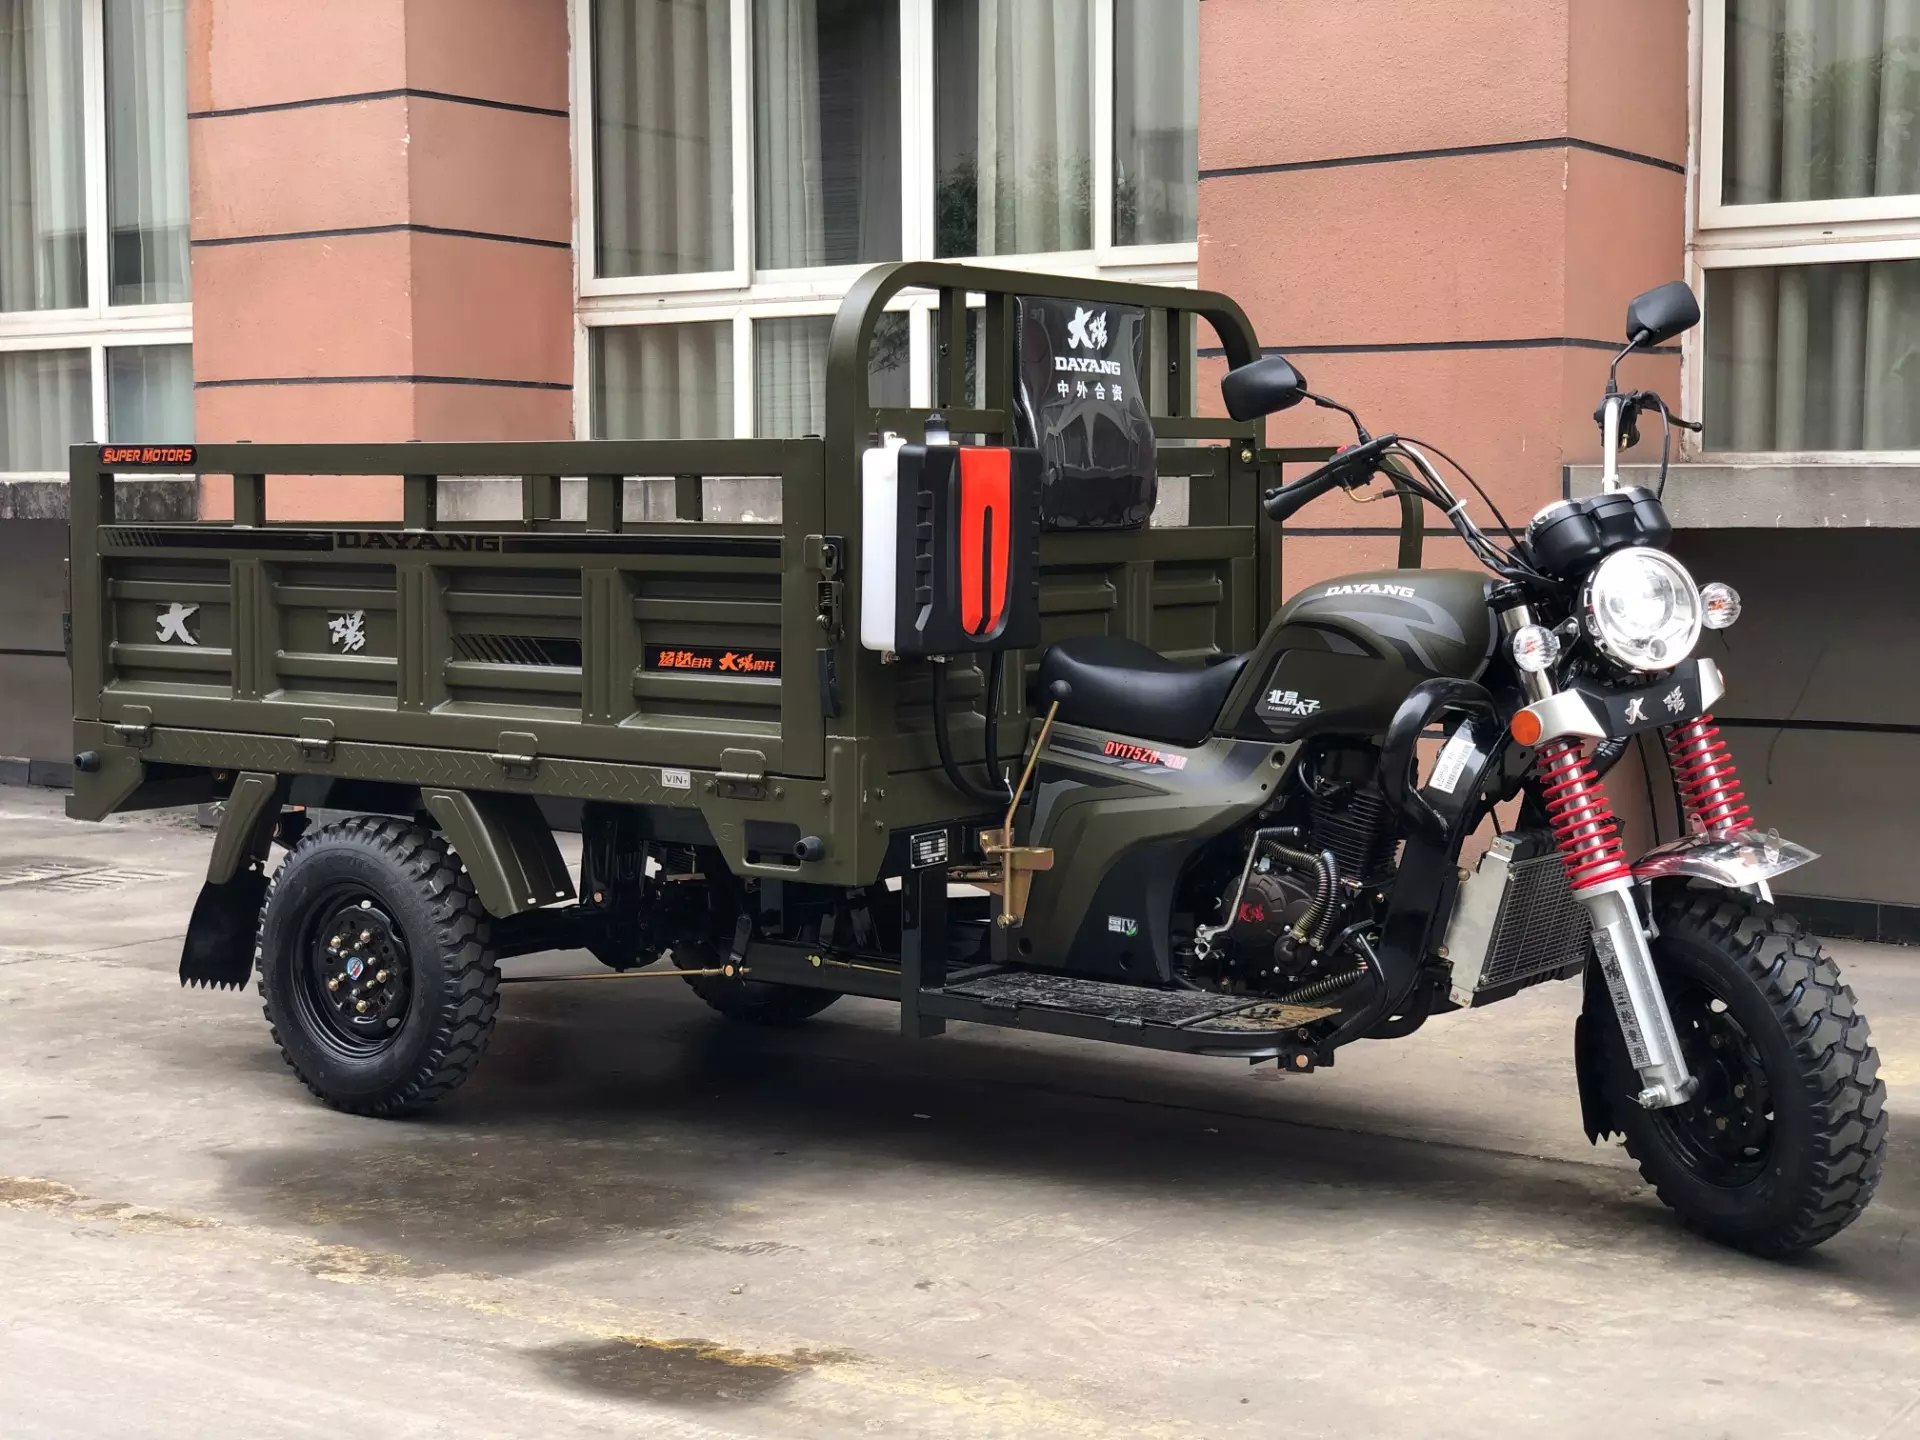 High Quality motorized 175cc air engine Heavy duty cargo tricycle passenger reliable China Powerful engine CCC For Adult